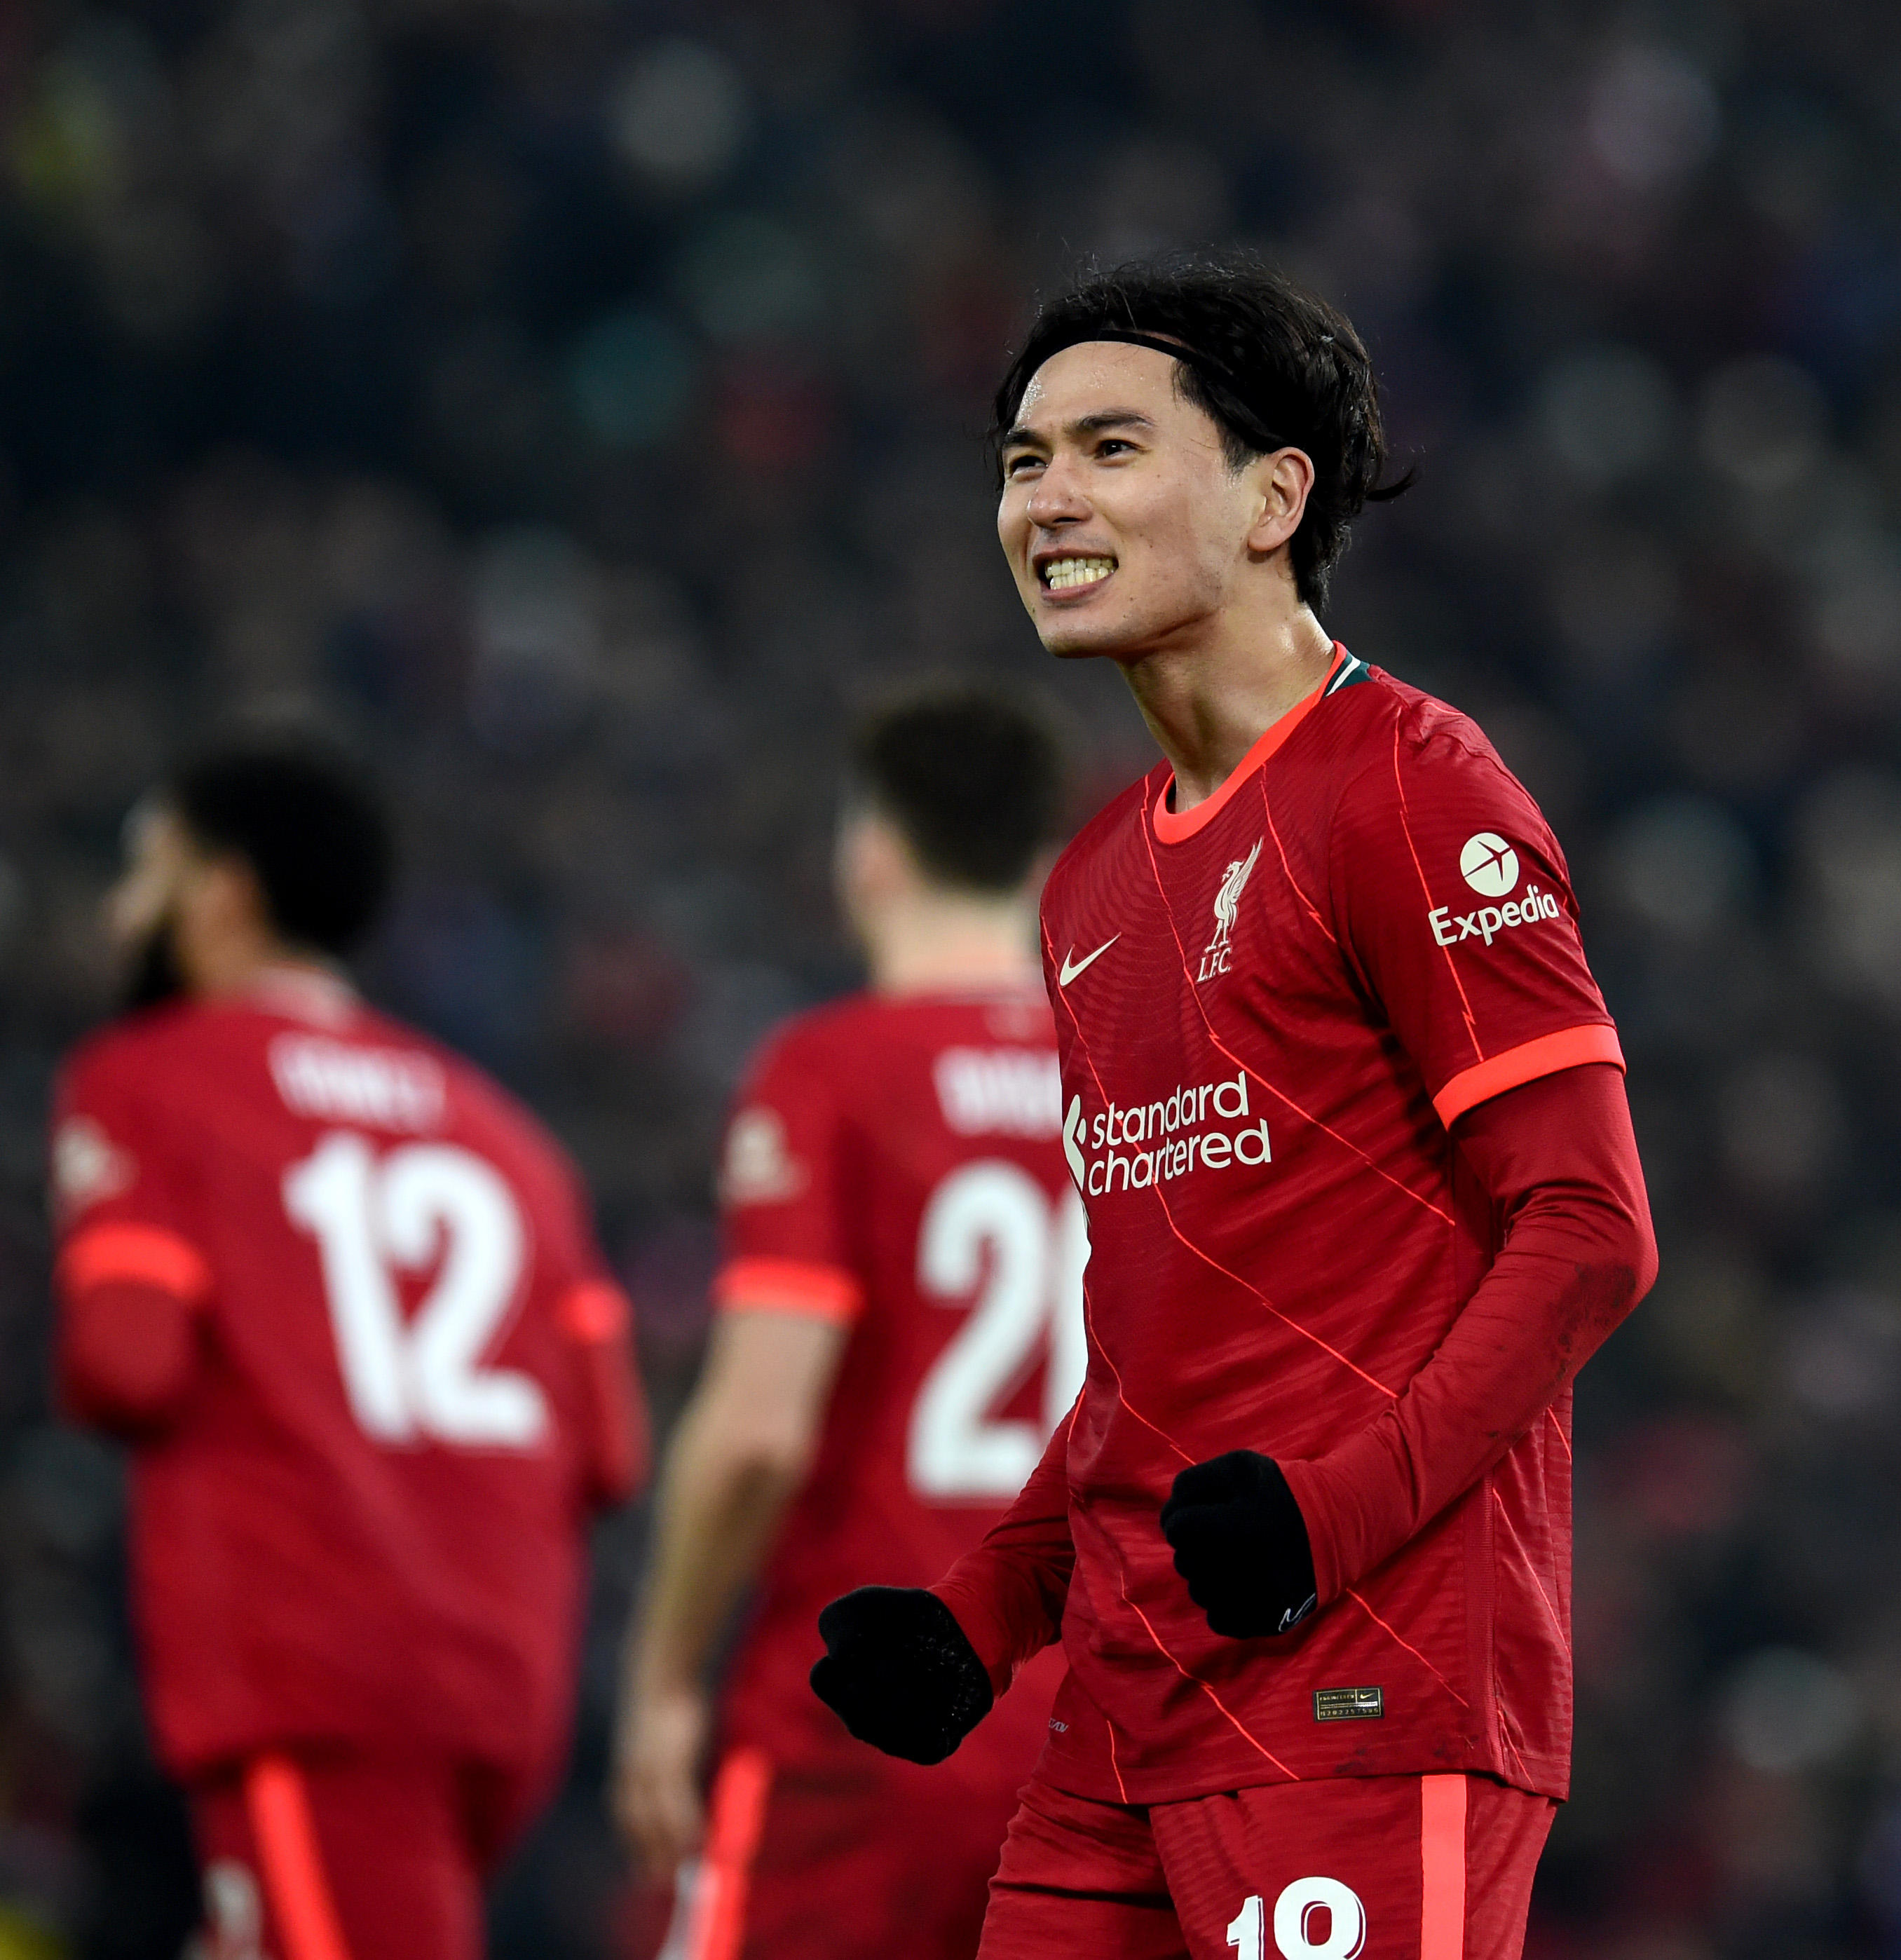 Liverpool 2-1 Norwich City: Emirates FA Cup- Minamino’s first-half brace helps Liverpool beat Norwich to keep quadruple hopes alive 